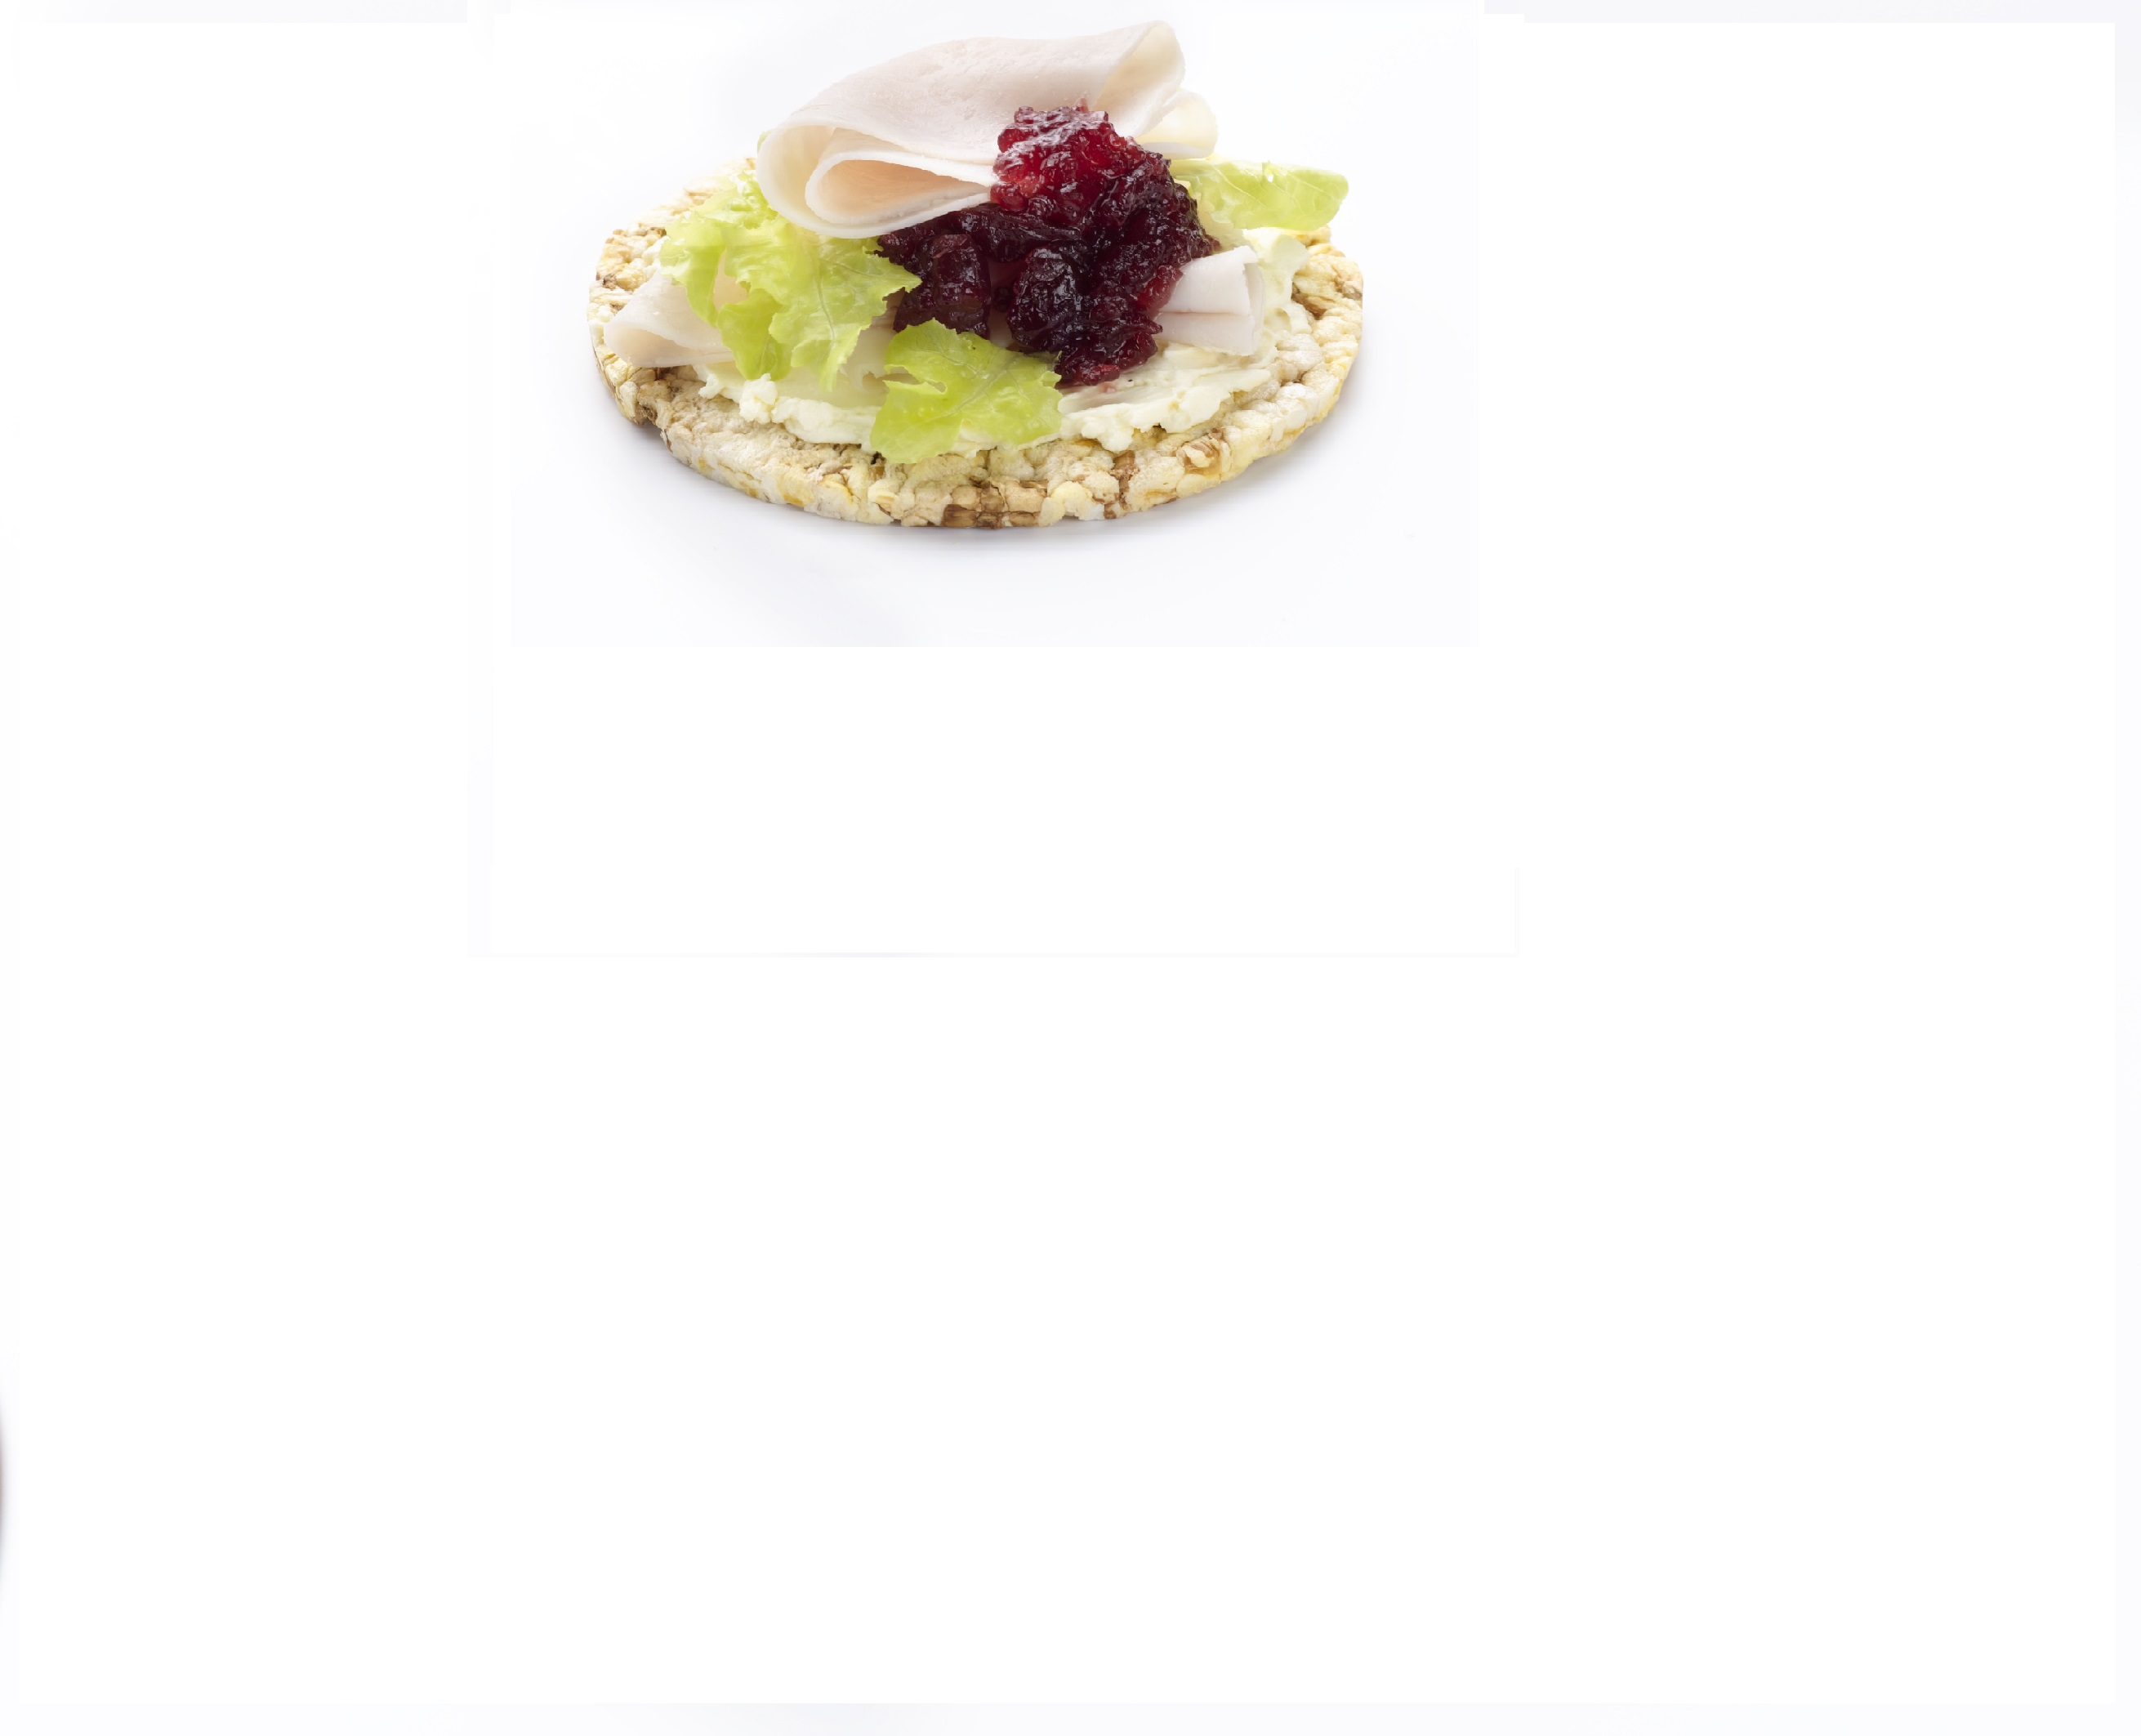 Quick lunch of creamed cheese, turkey & cranberry on Corn Thins slices